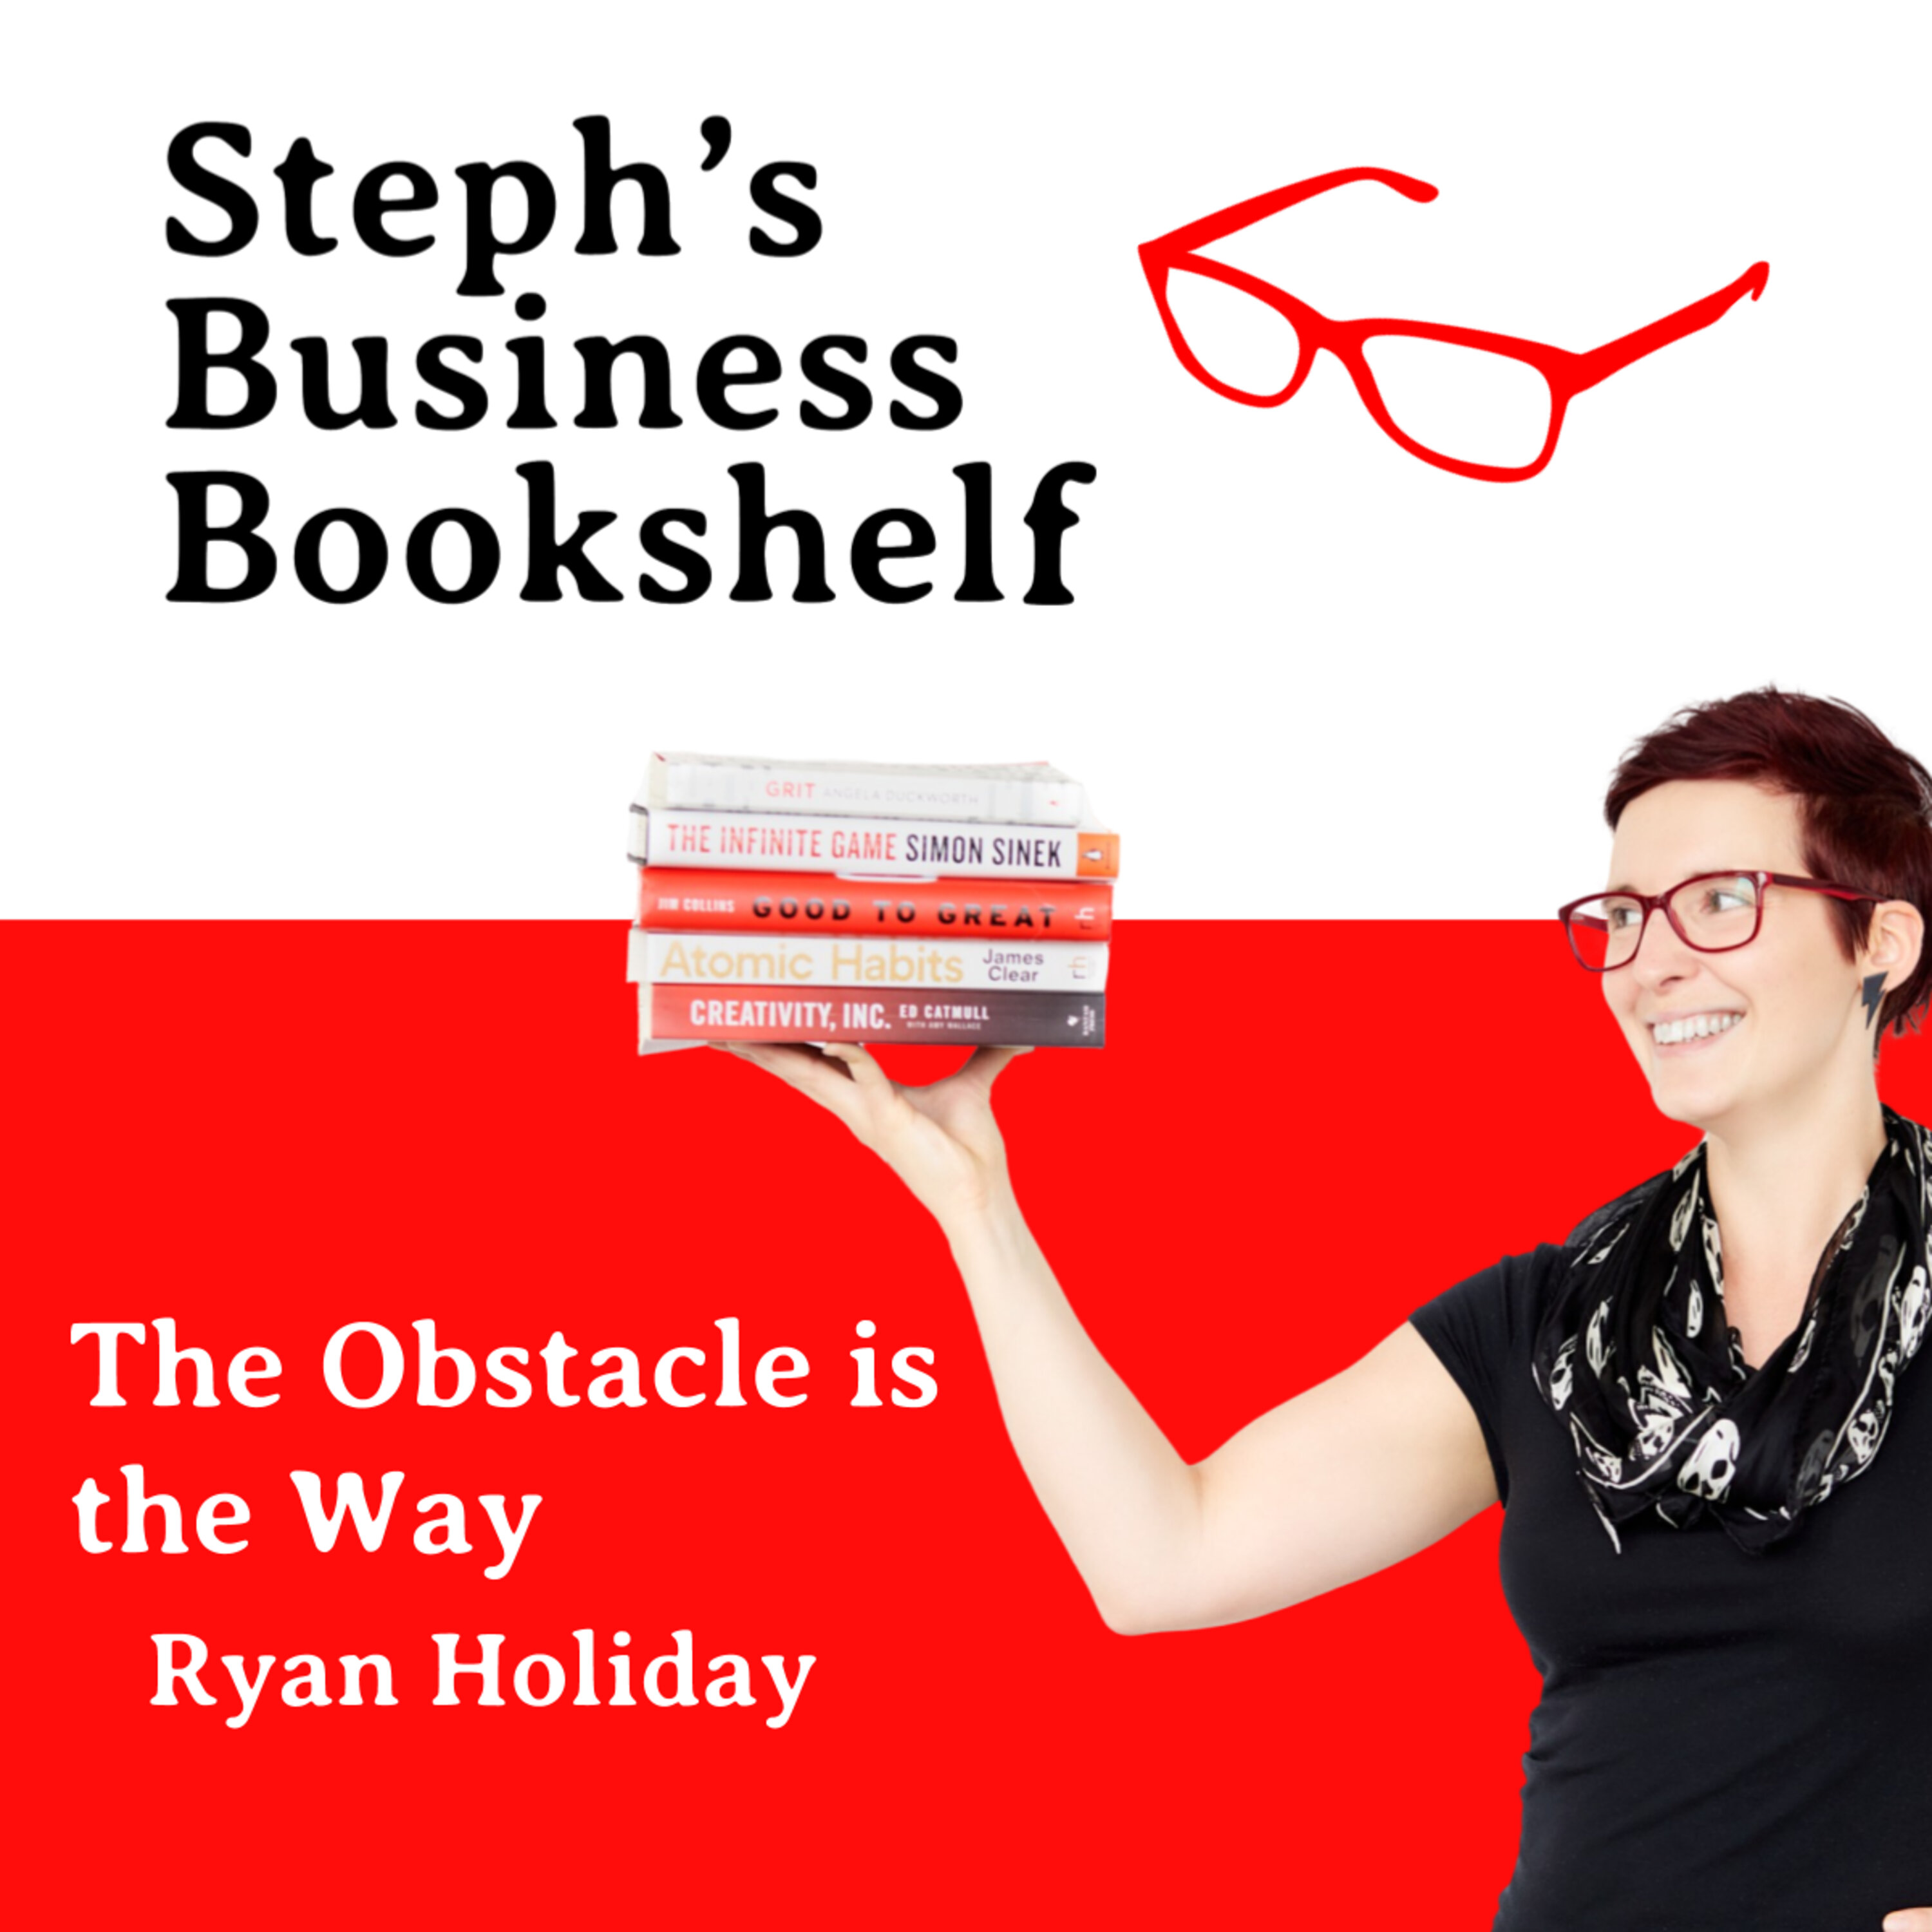 The Obstacle is the Way by Ryan Holiday: Why you need to domesticate your emotions and act